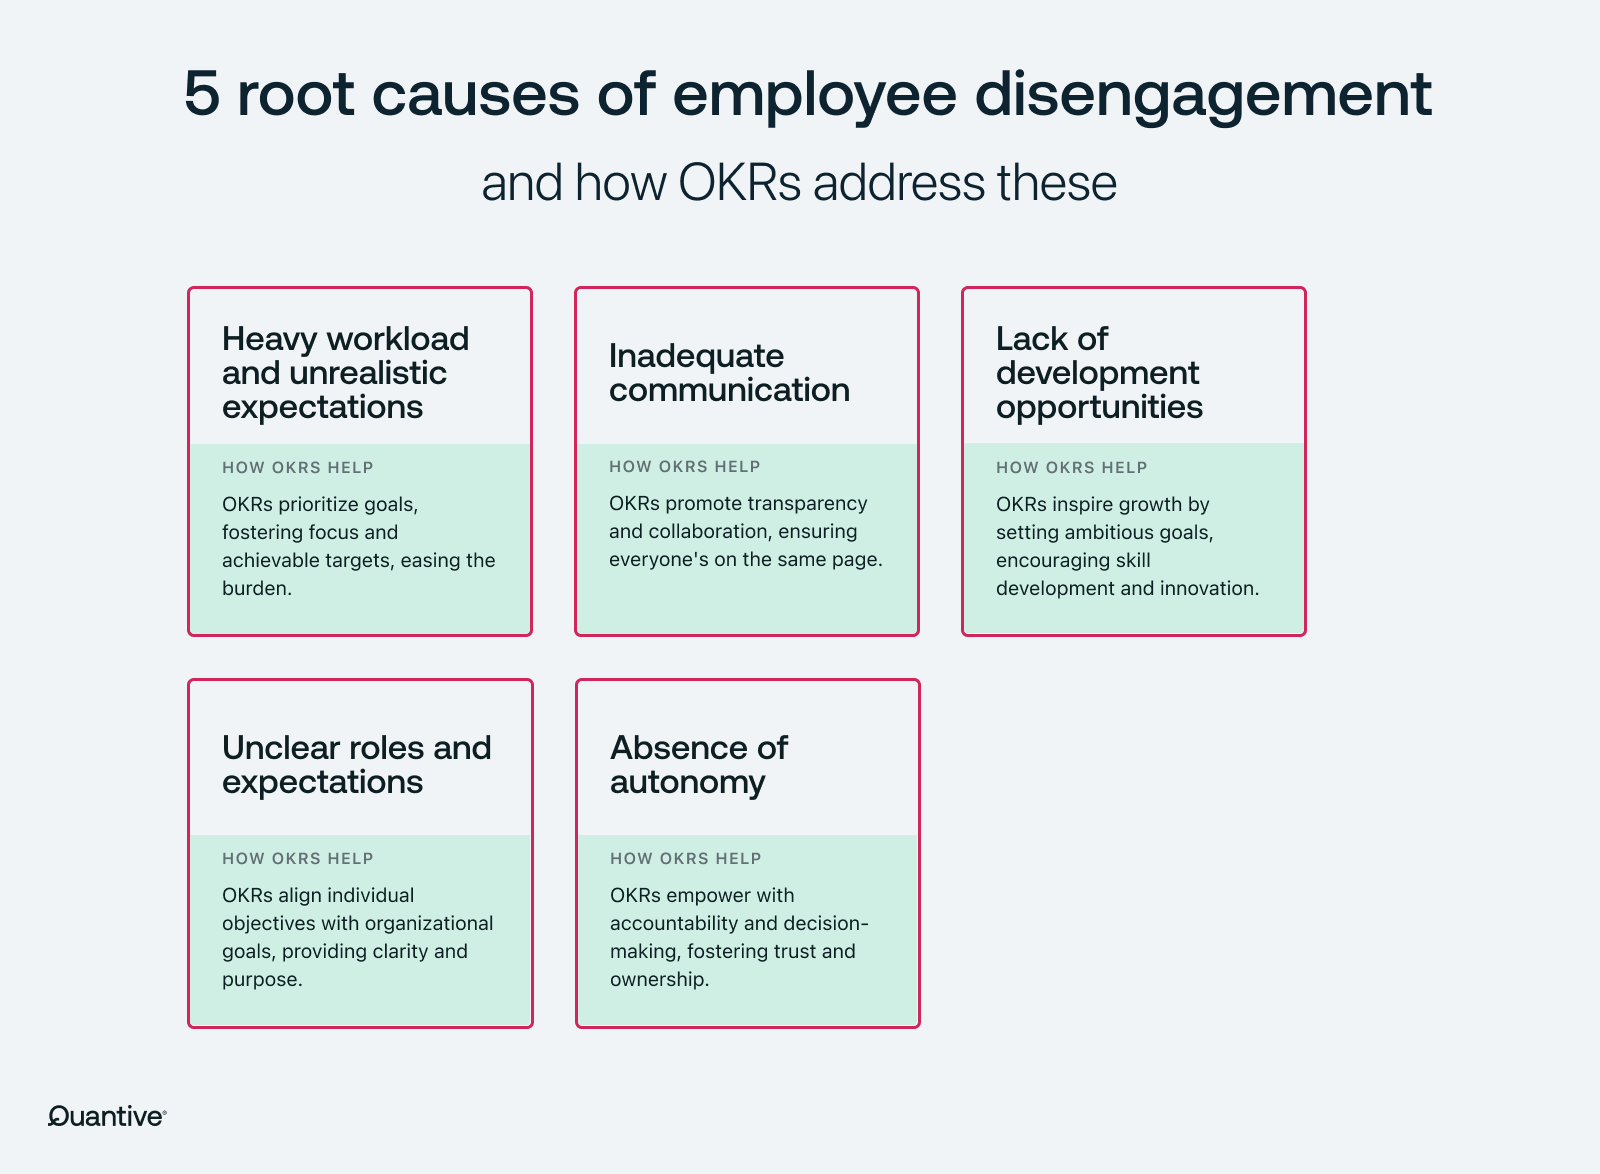 root causes of employee disengagement and how OKRs address them